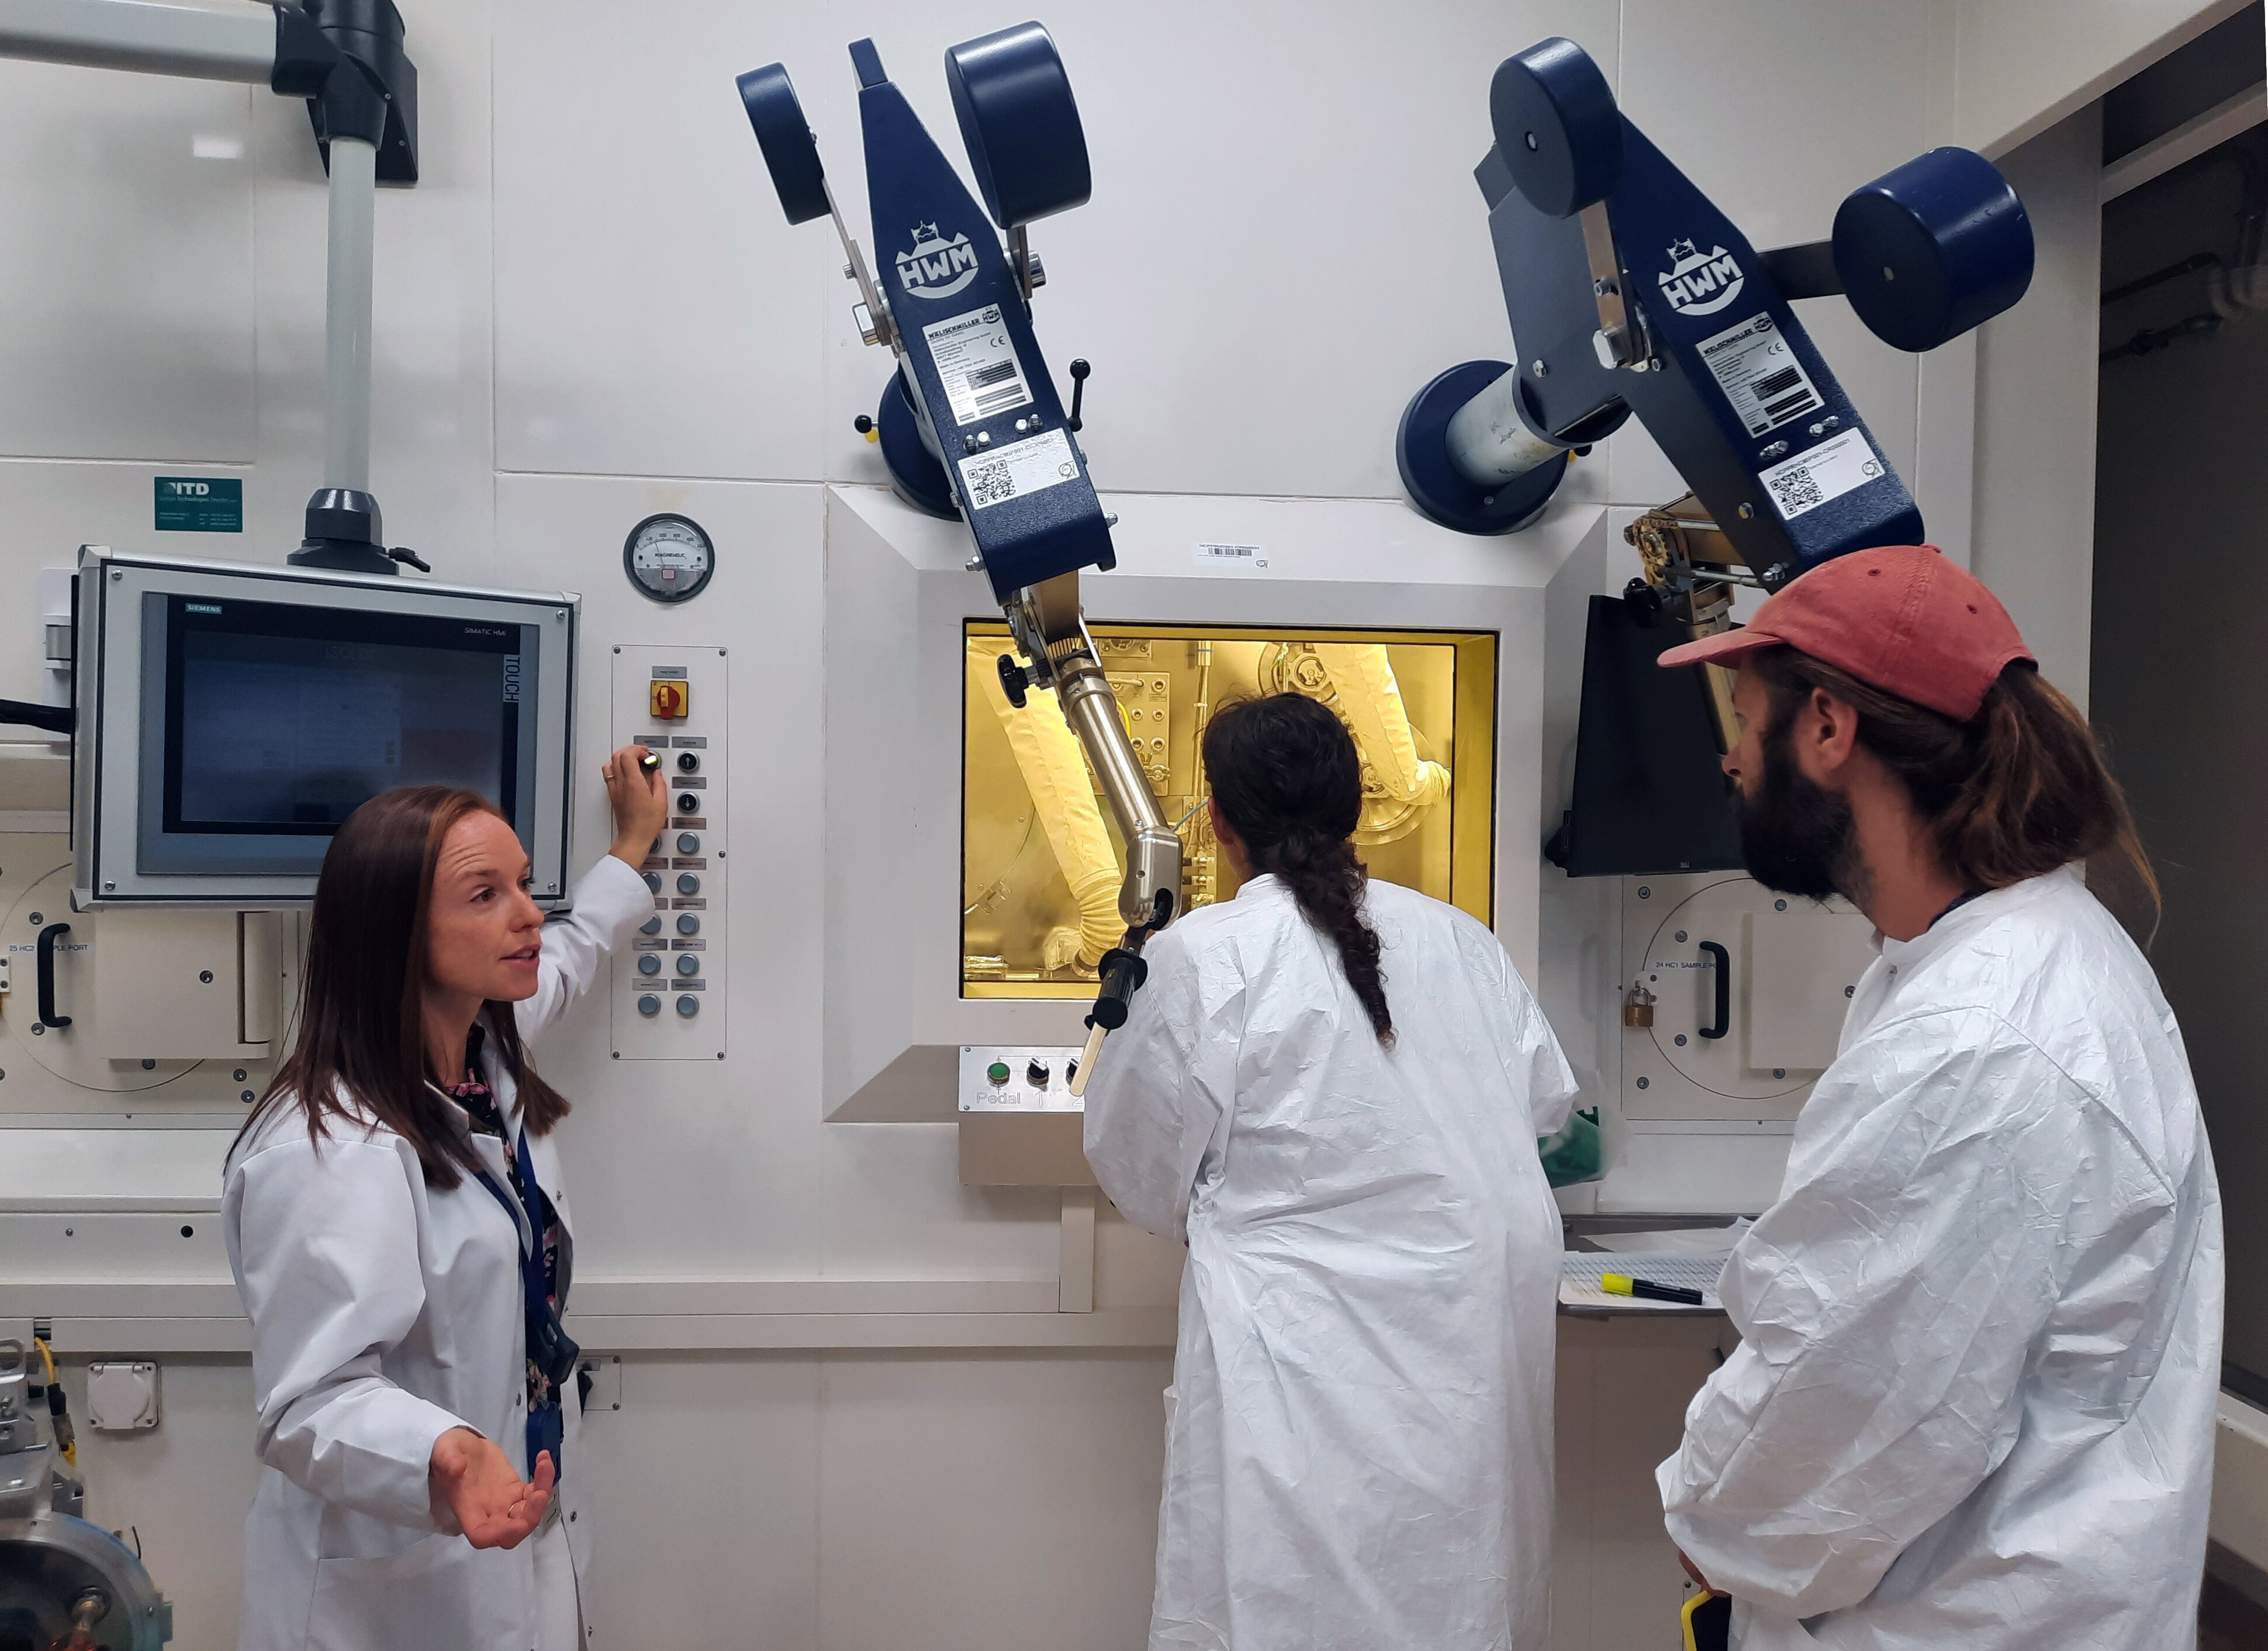 Swiss artists Andrea Anner and Thibault Brevet (AATB) with scientist Laura Lambert at the MEDICIS facility during their residency with Arts at CERN (image: CERN)